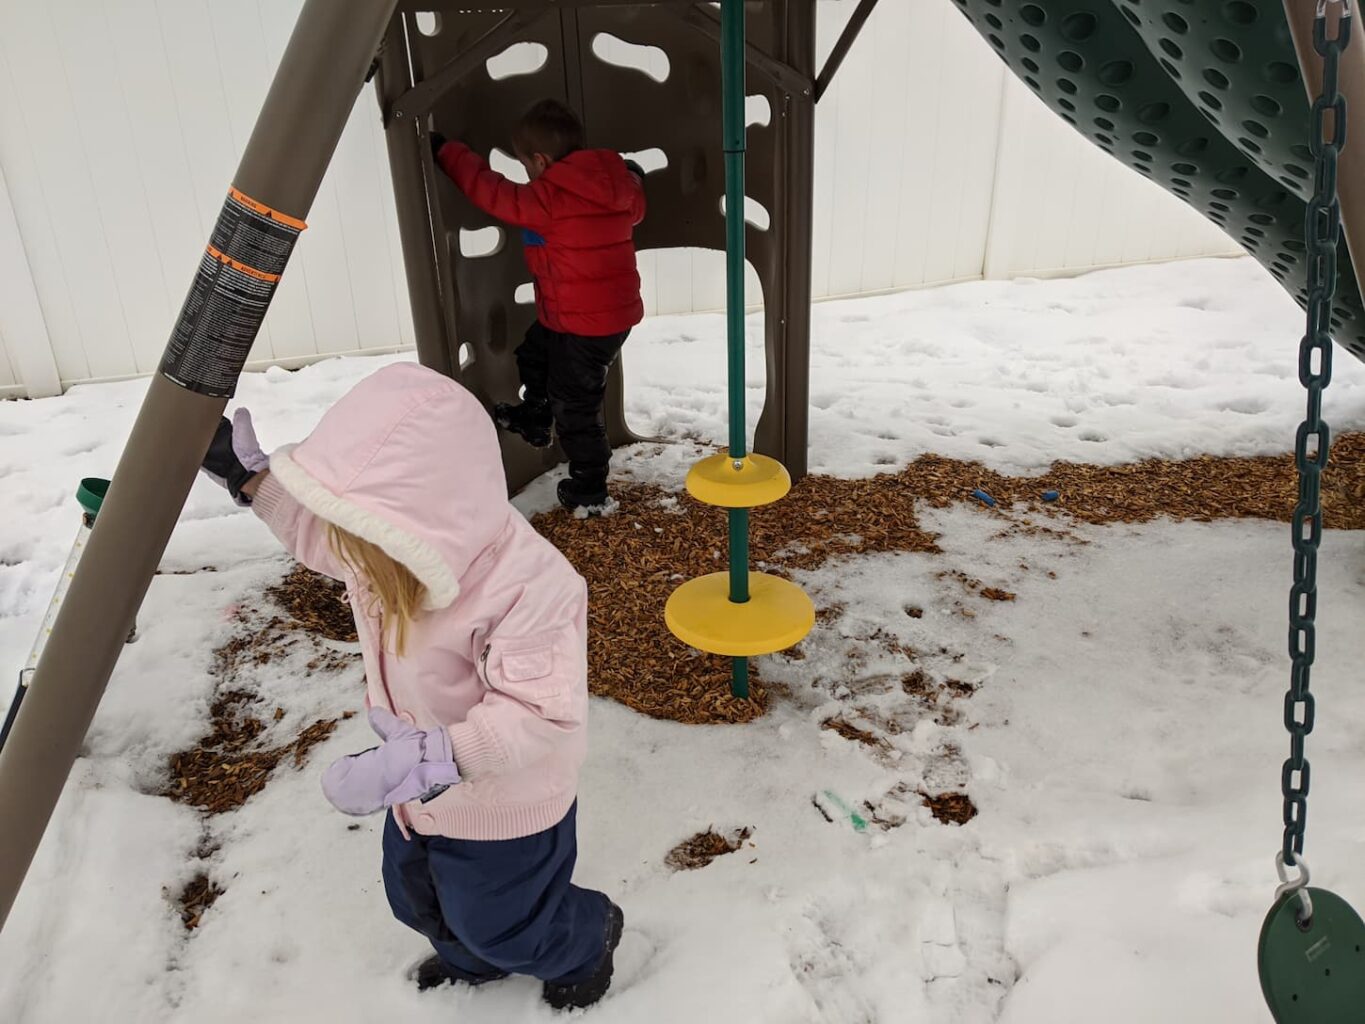 An image of my kids getting ready to go check eggs in the winter with a layer of snow on the ground.